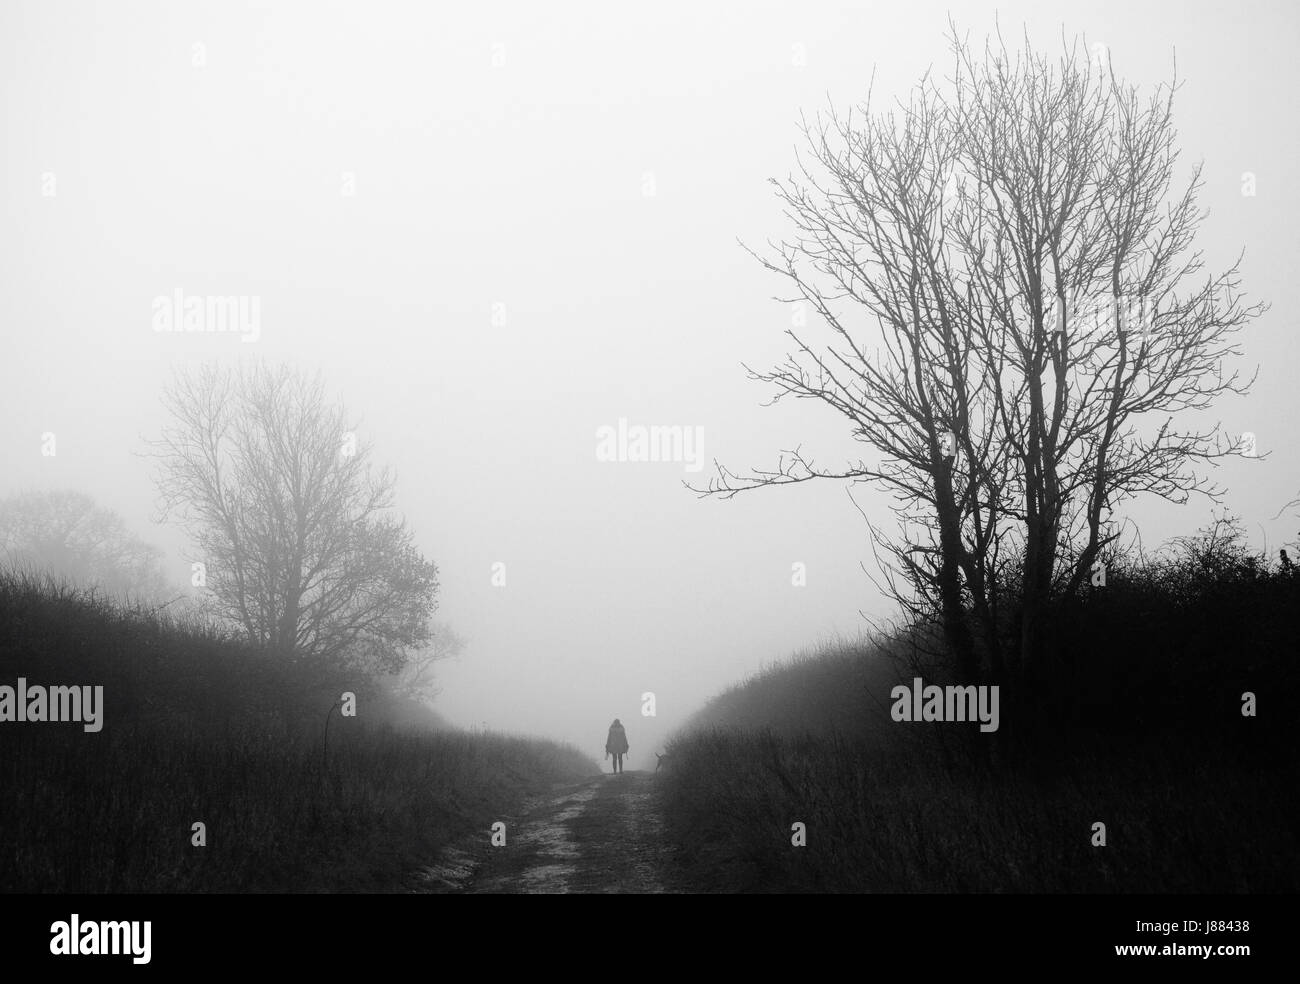 Woman walking along the Peddar's Way path in thick fog. Stock Photo